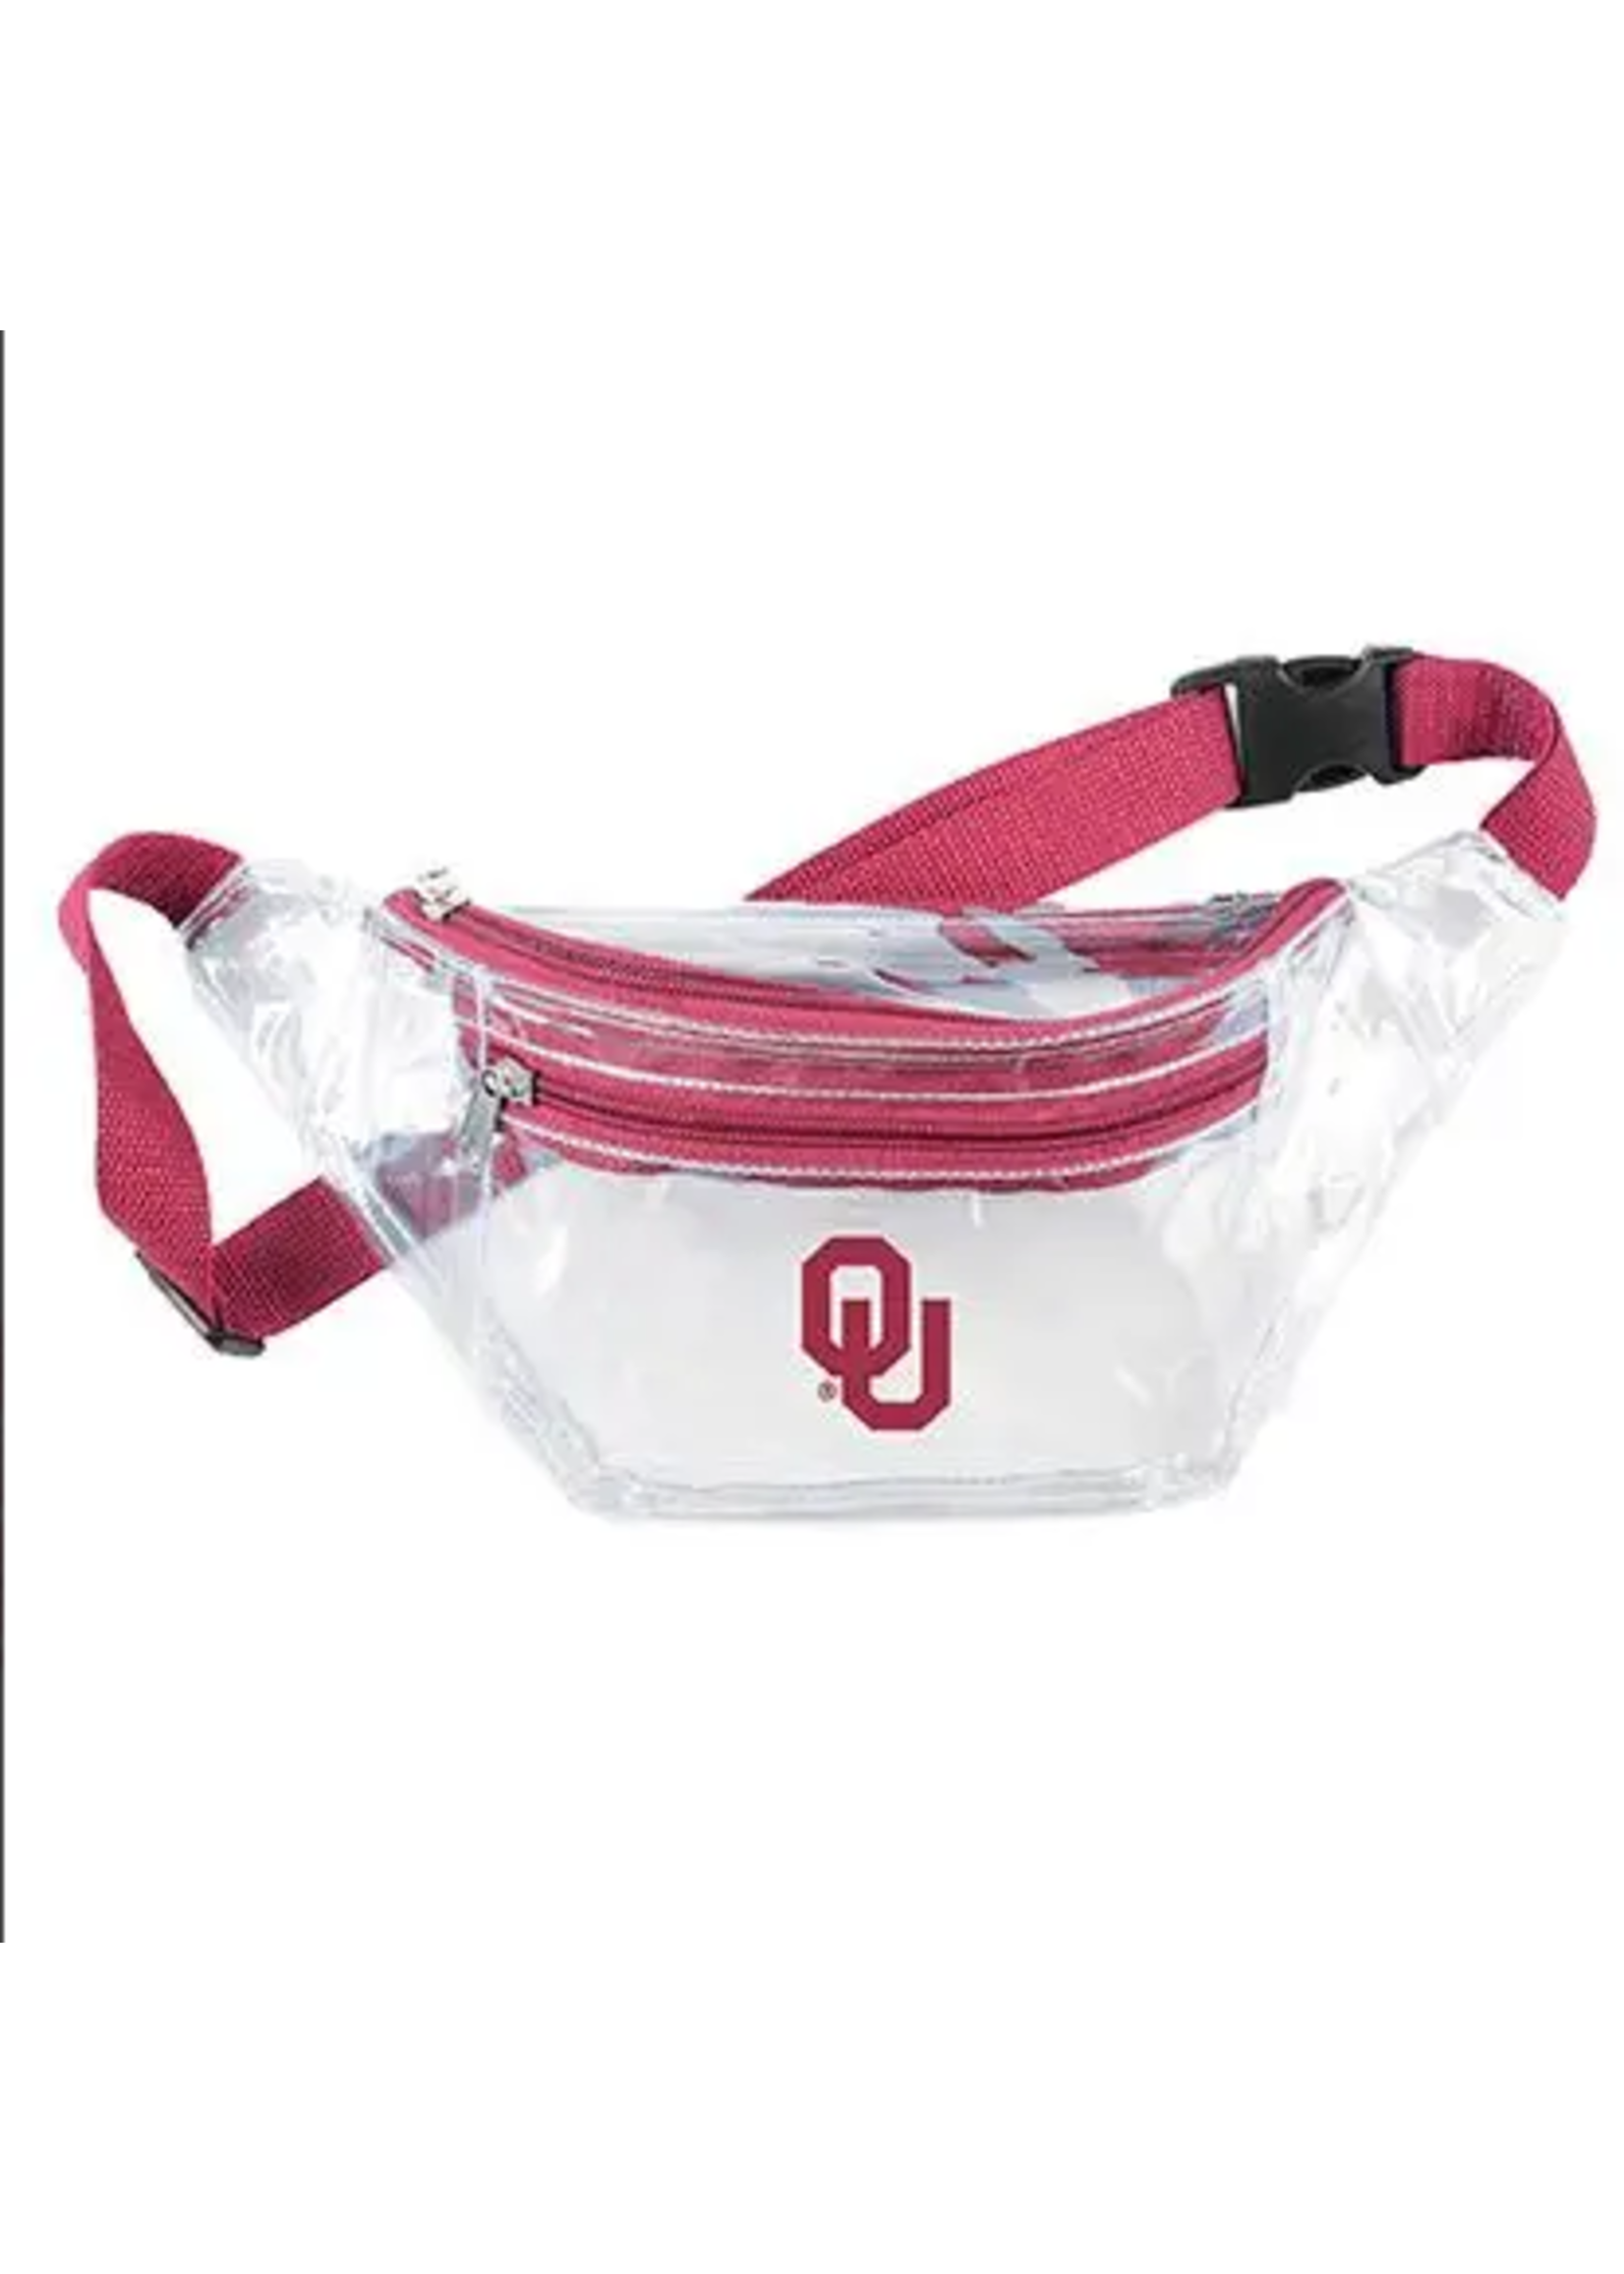 Desden clear state fanny pack LC